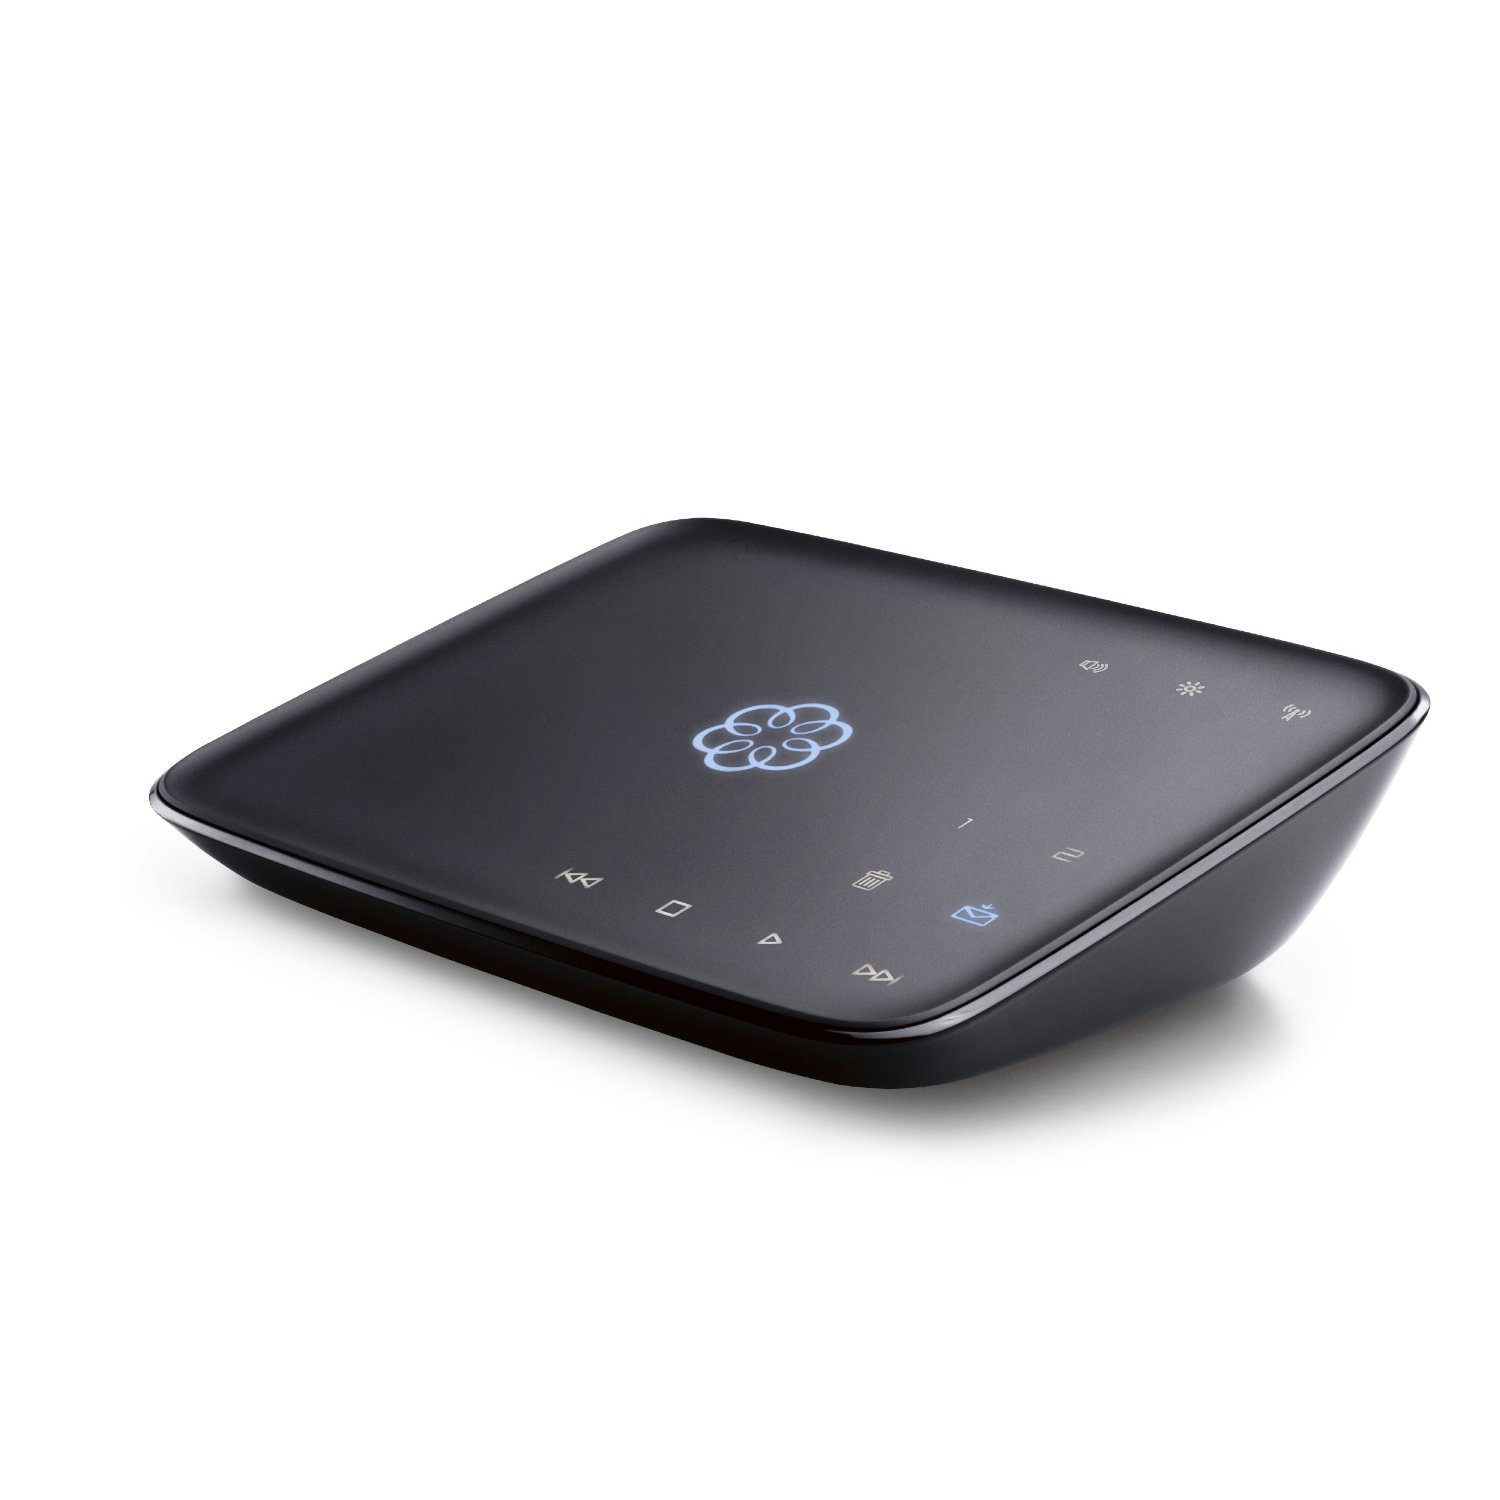 http://thetechjournal.com/wp-content/uploads/images/1111/1320198462-ooma-telo-free-home-phone-service-1.jpg